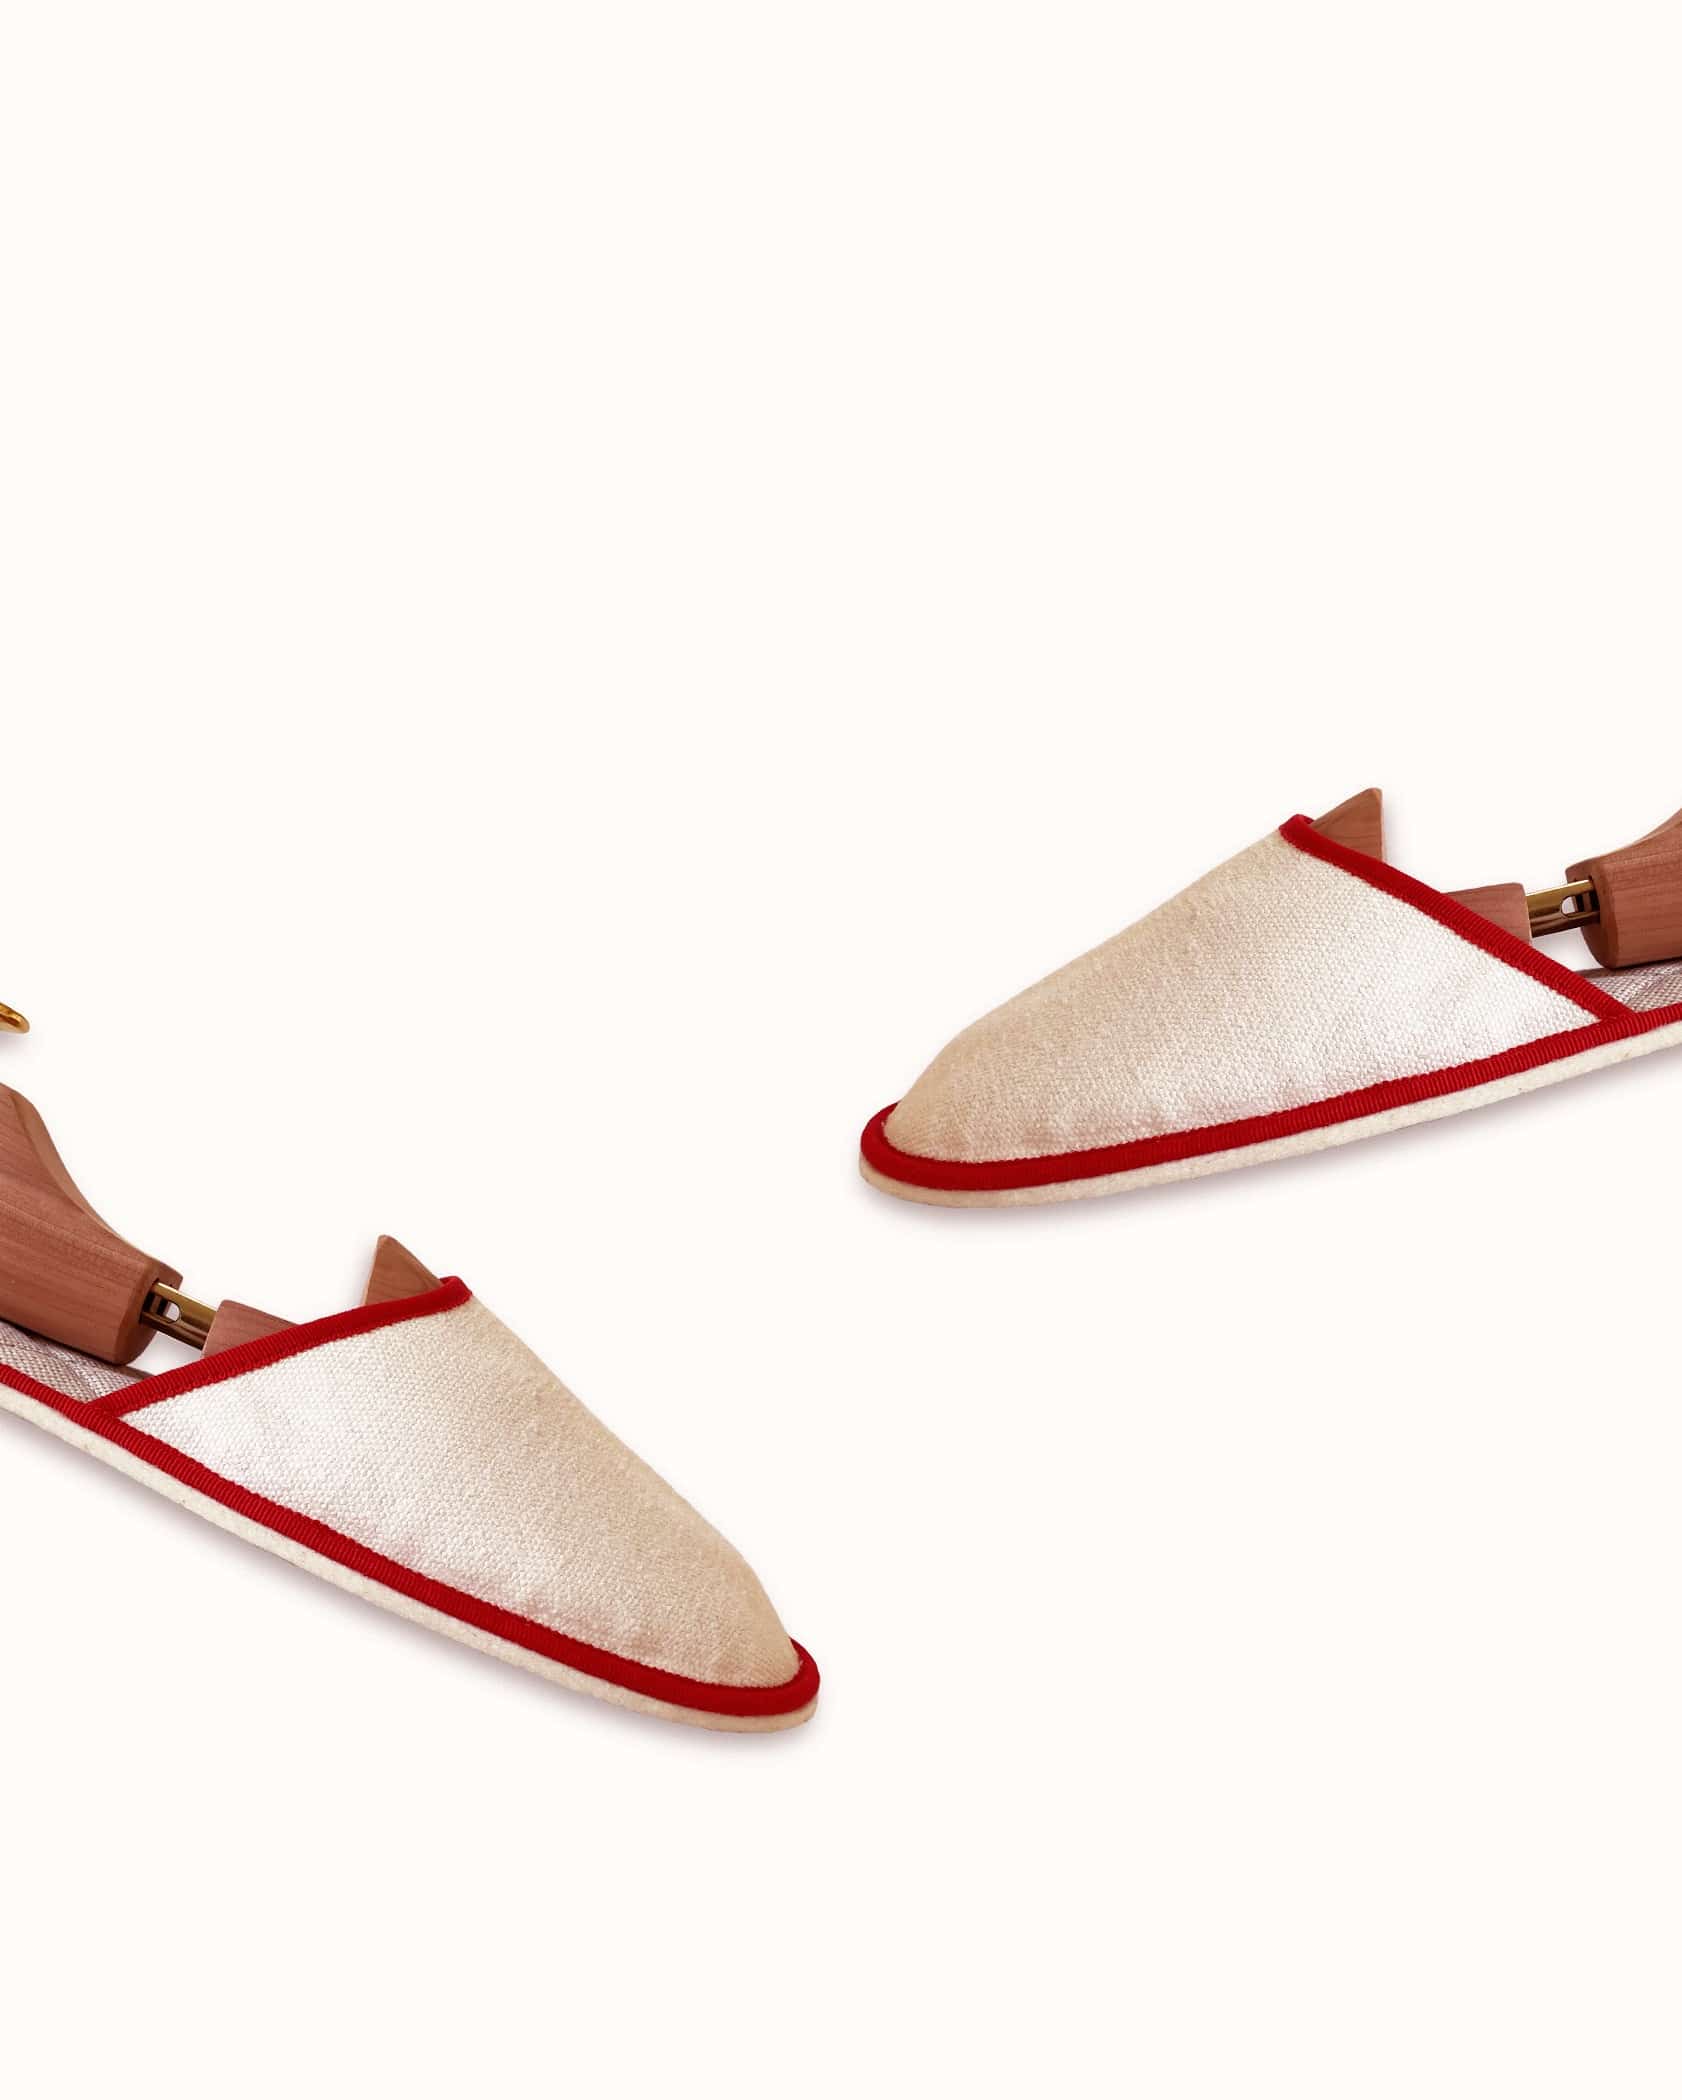 French slippers for men, women and kids. Le Spleen "Voiello", beige and red. A slip-on like hotel slippers with a quilted padding and an outstanding craftsmanship manufacturing. Made in France.